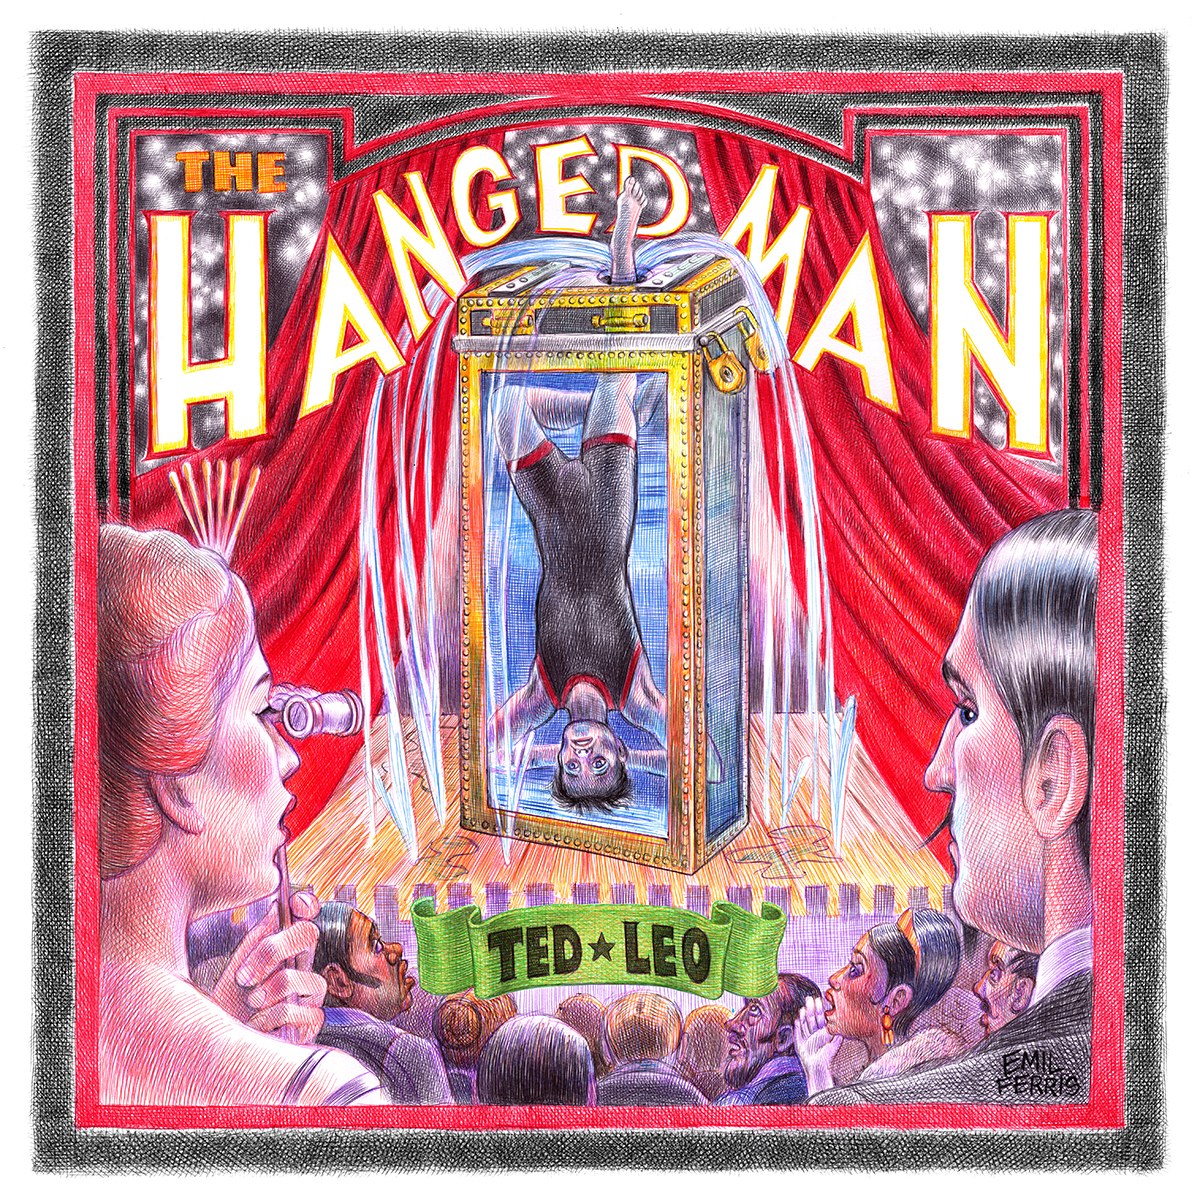 Ted Leo, The Hanged Man